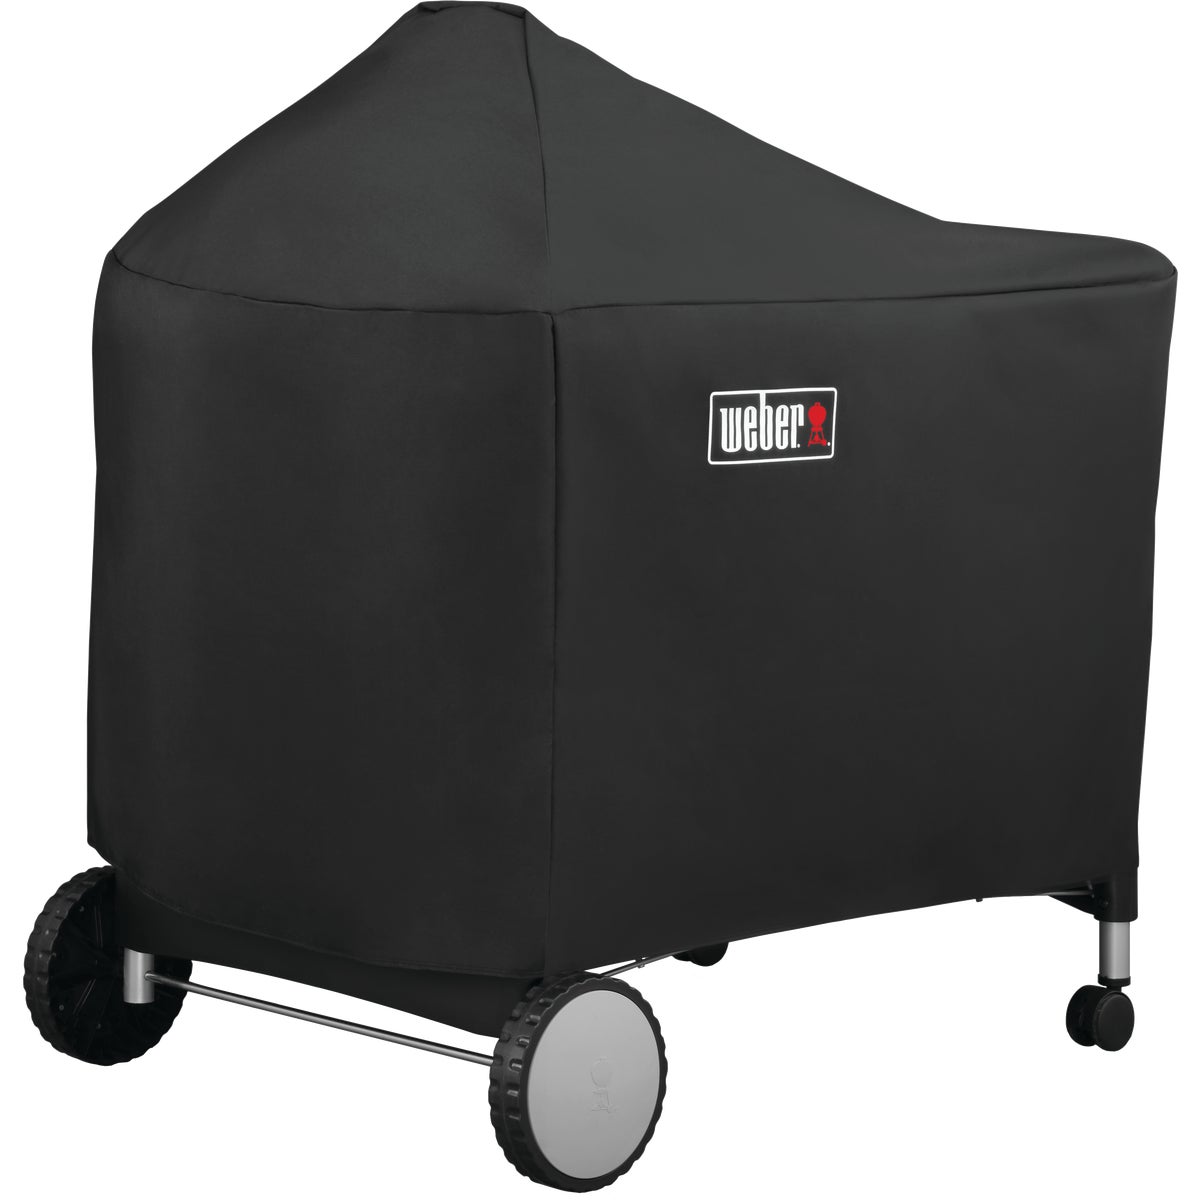 Item 801105, Heavy-duty cover is UV and extreme cold resistant.